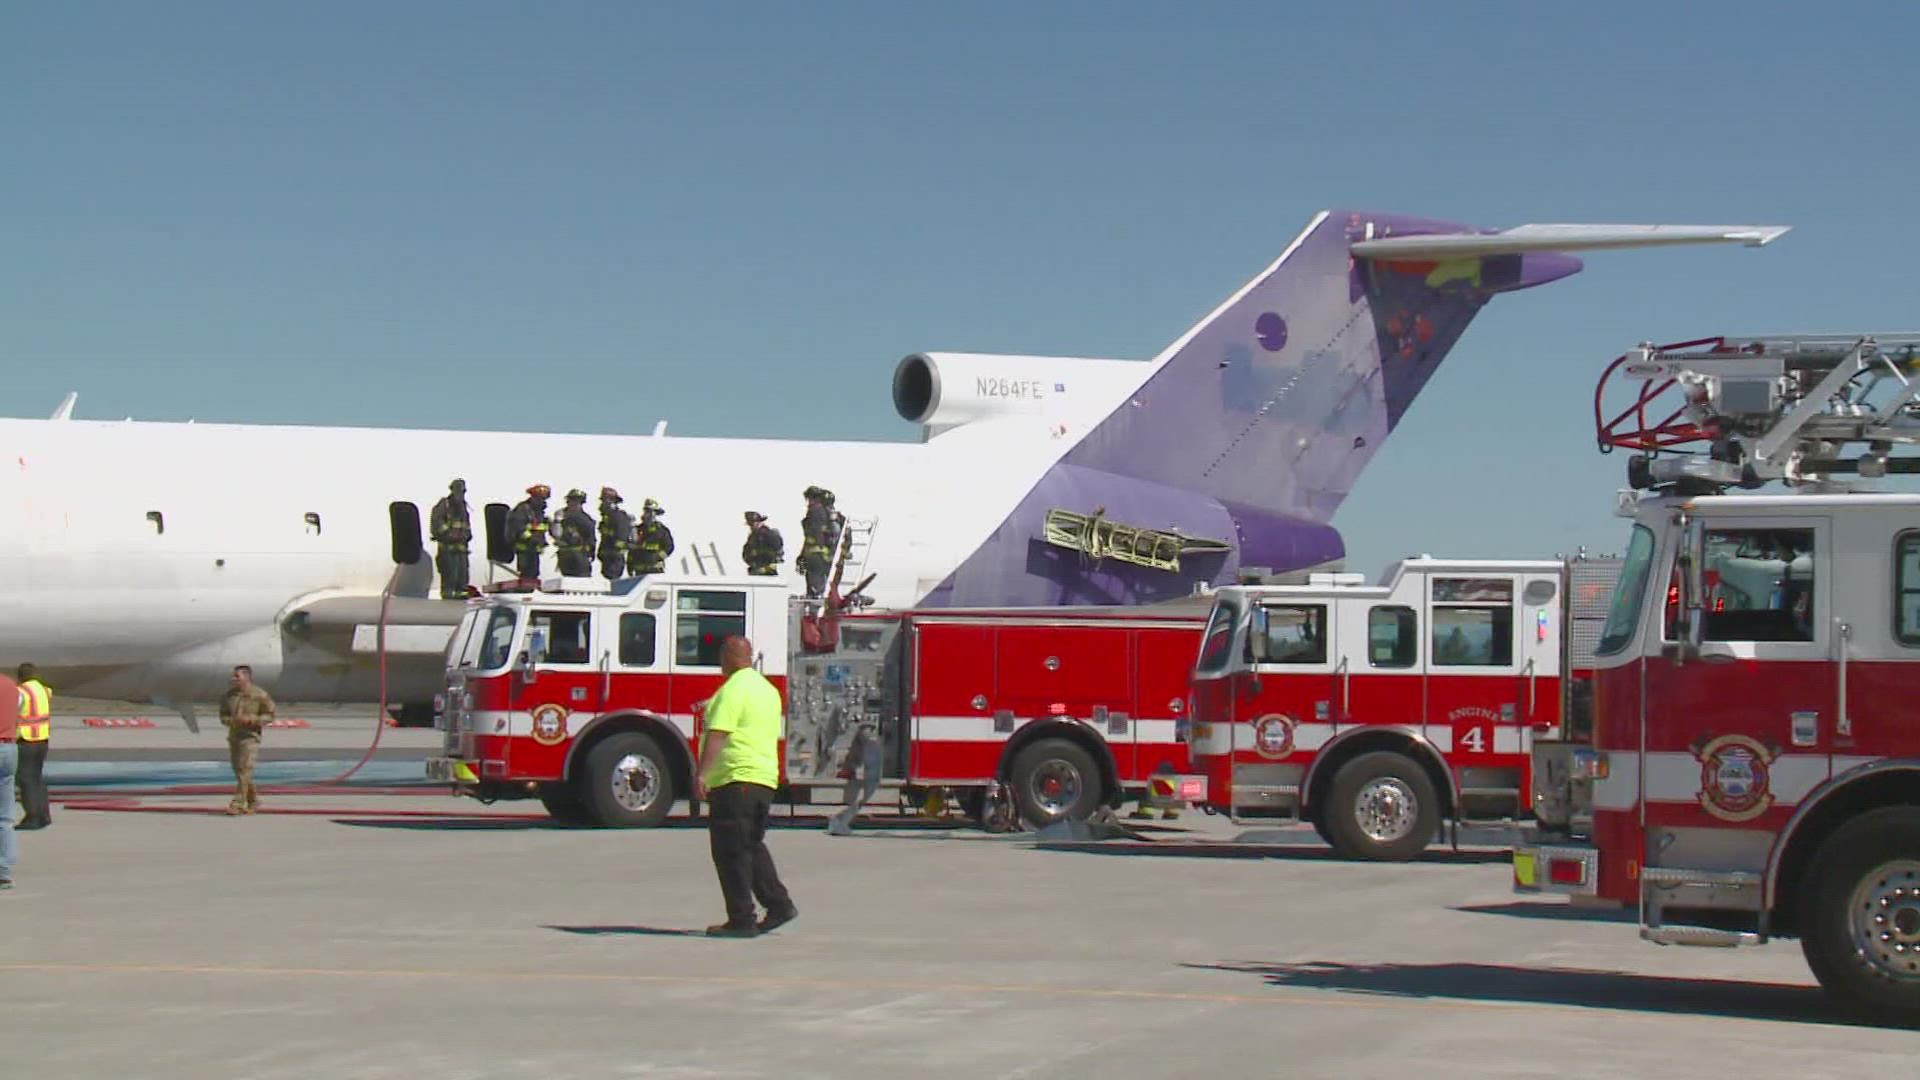 The goal was to give the airport's first responders an opportunity to practice their emergency response plan.